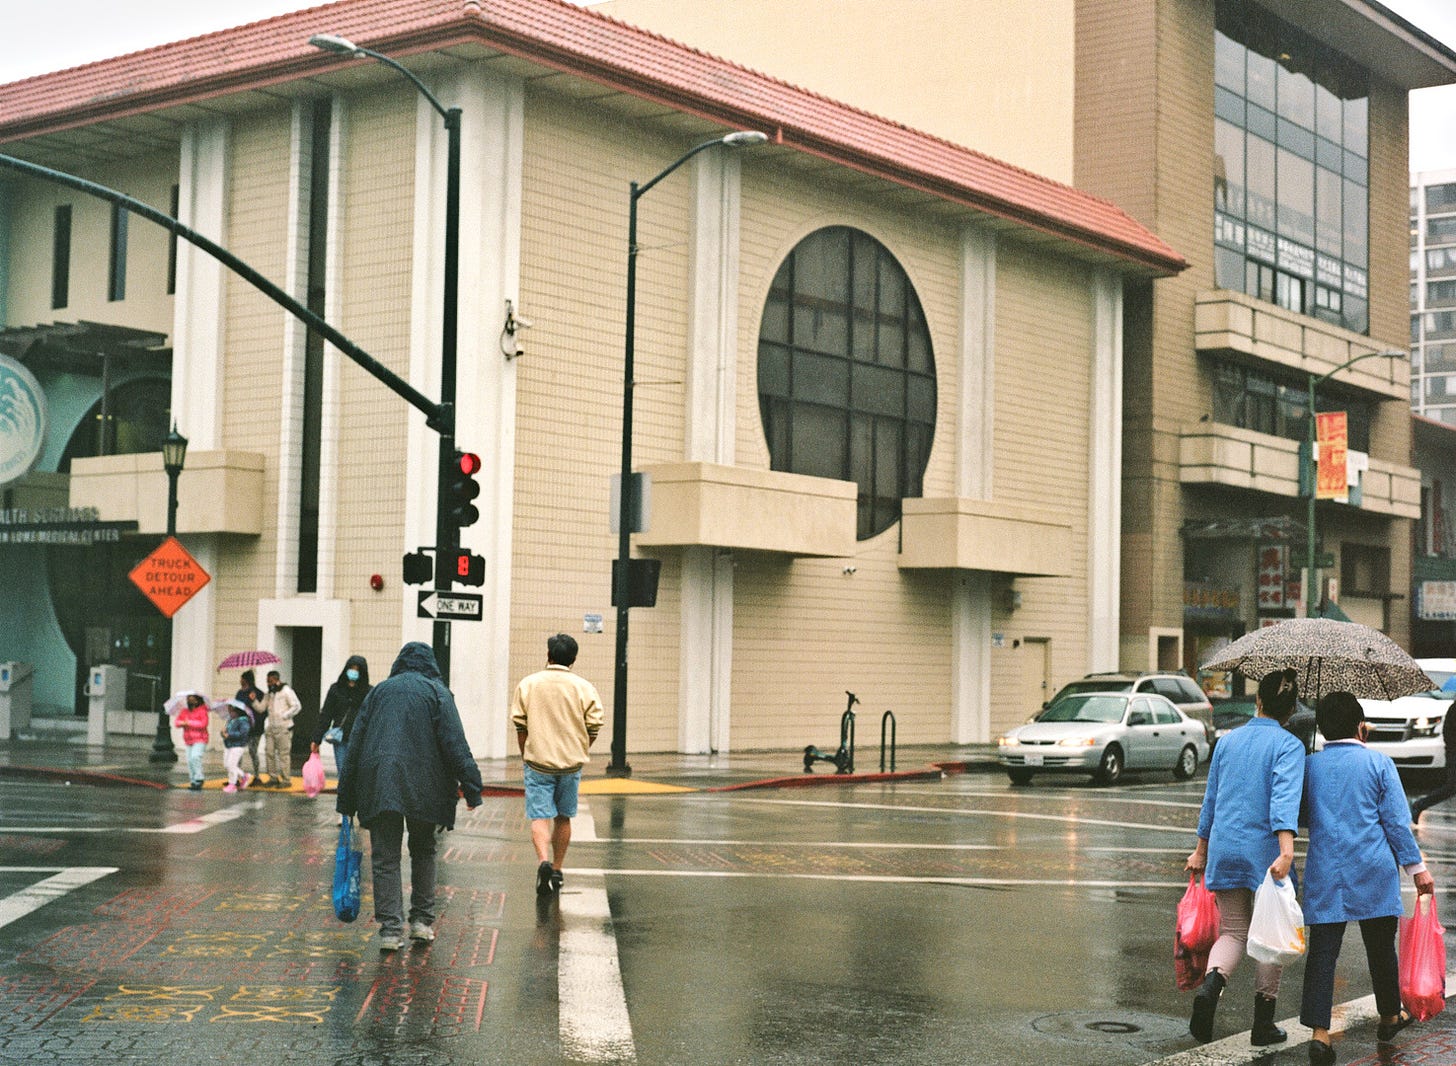 A multiple cross-walk in Oakland's Chinatown with different individuals and groups crossing. It's a rainy day.